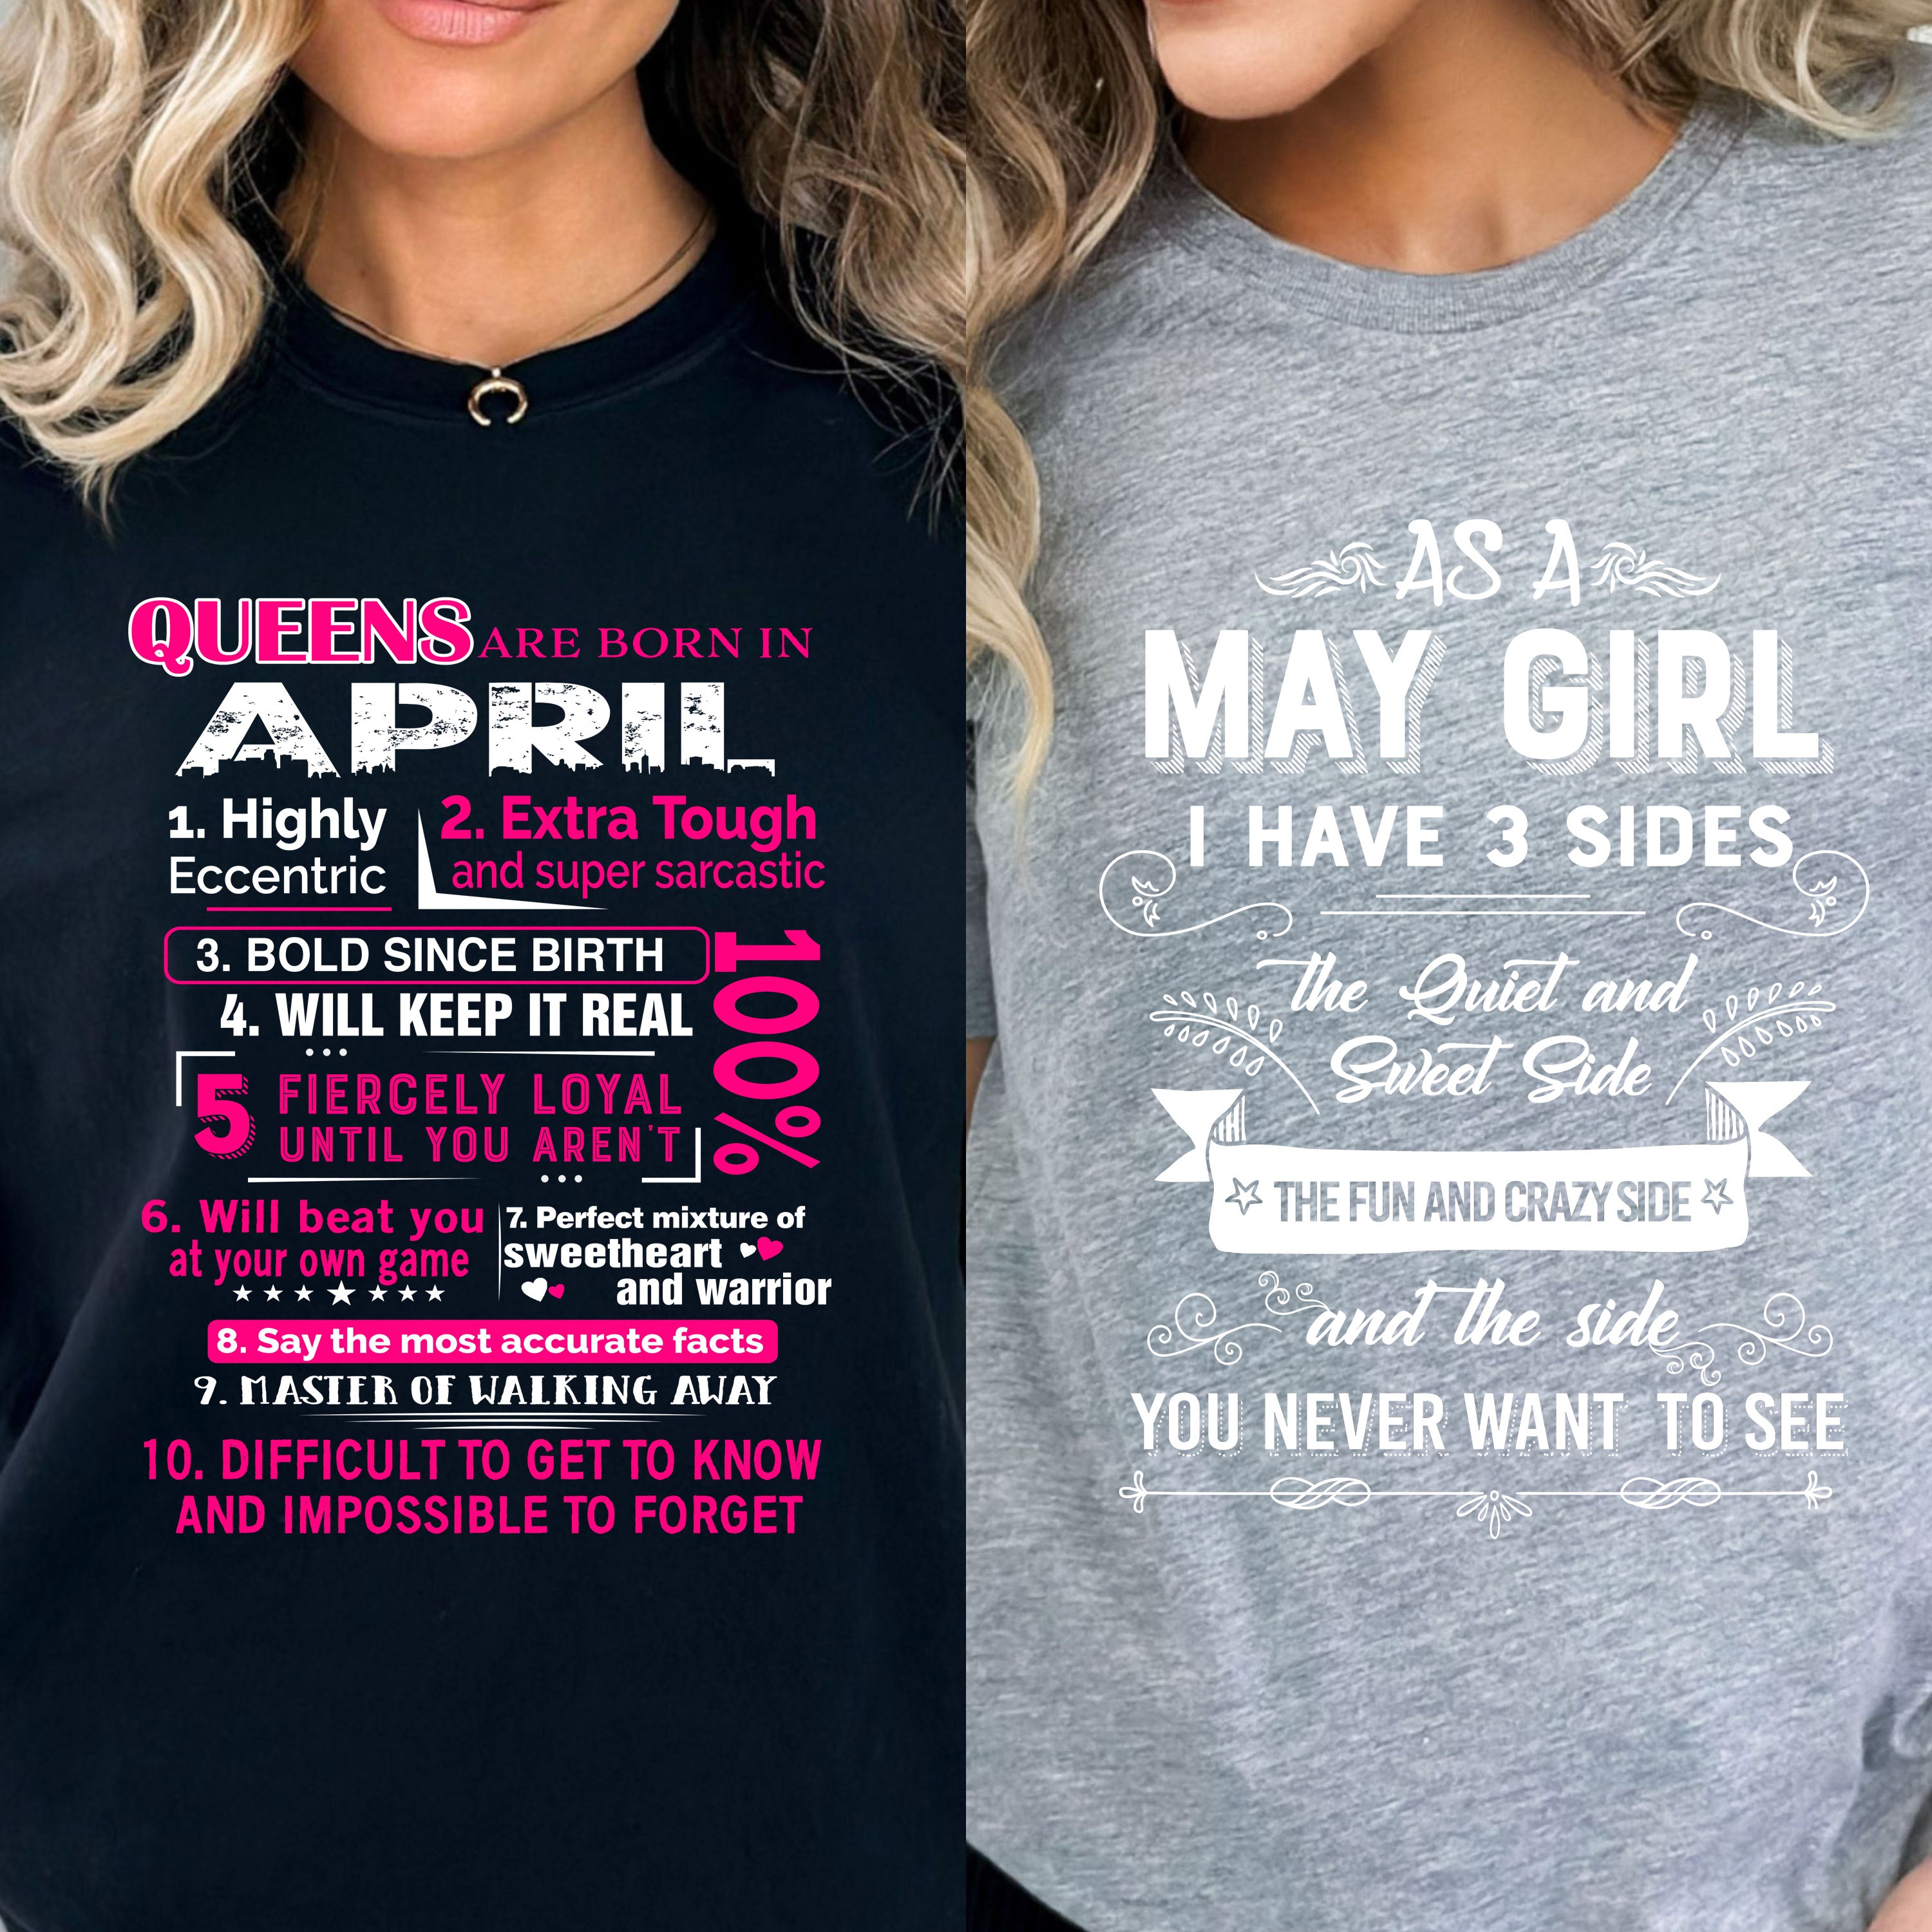 "May Queens + 3 Sides-Pack of 2",T-Shirt. Ships in 24 hours.